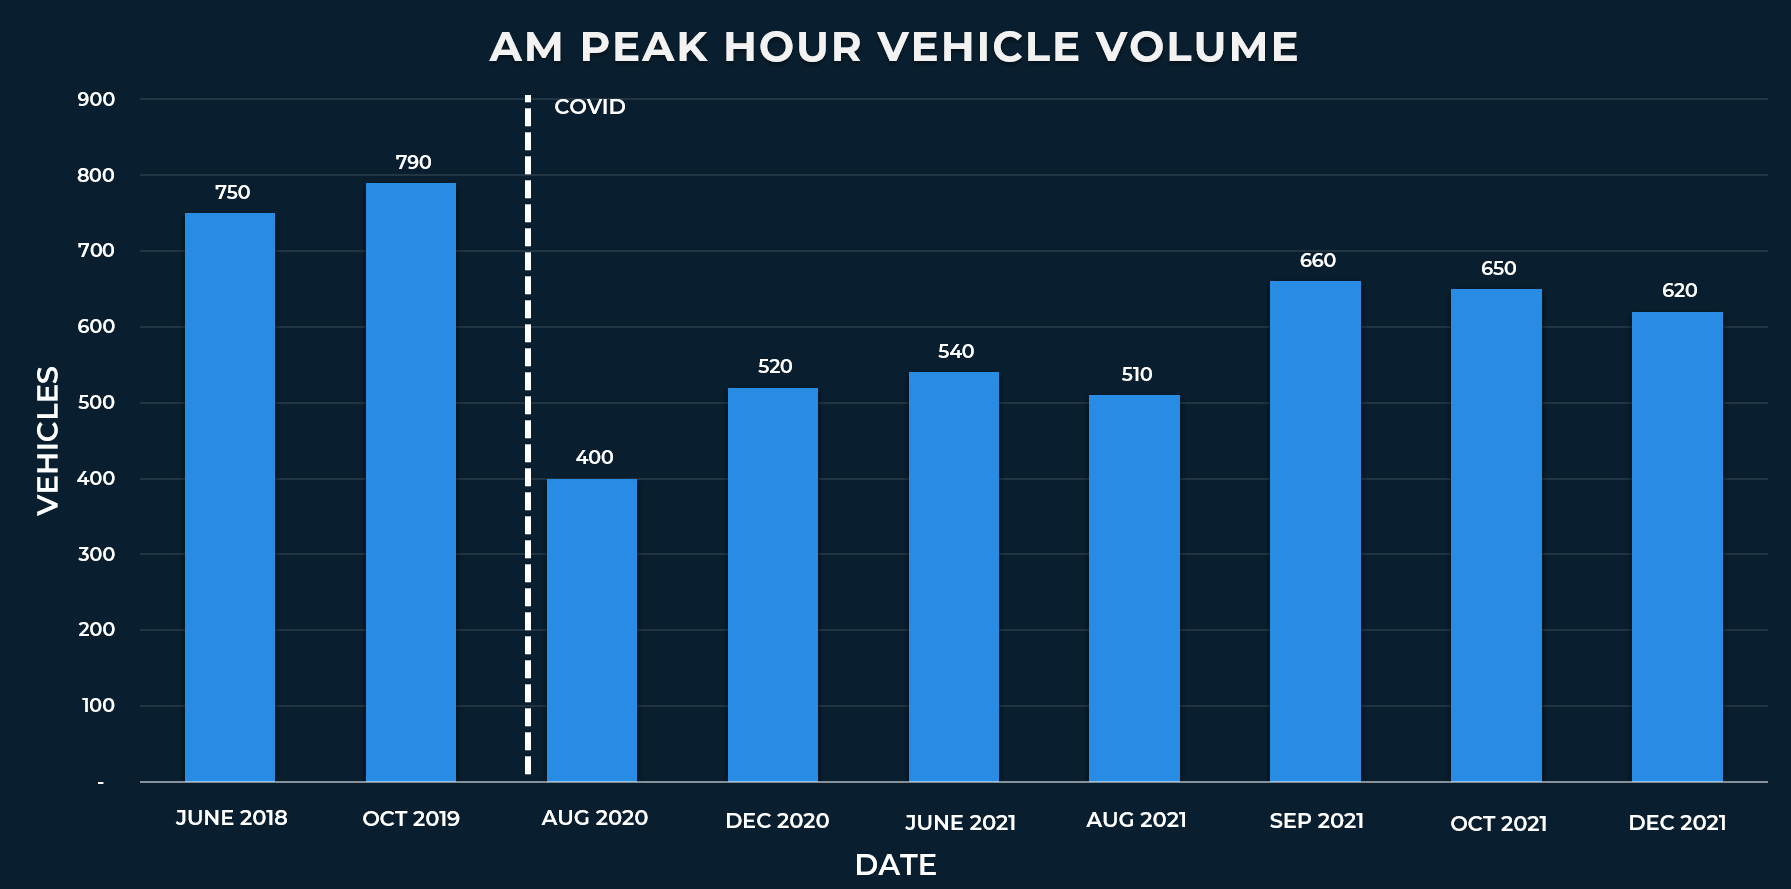 A bar chart shows the a.m. peak hour volumes we measured on State Street. June 2018: 750 October 2019: 790 August 2020: 400 December 2020: 520 June 2021: 540 August 2021: 510 September 2021: 660 October 2021: 650 December 2021: 620